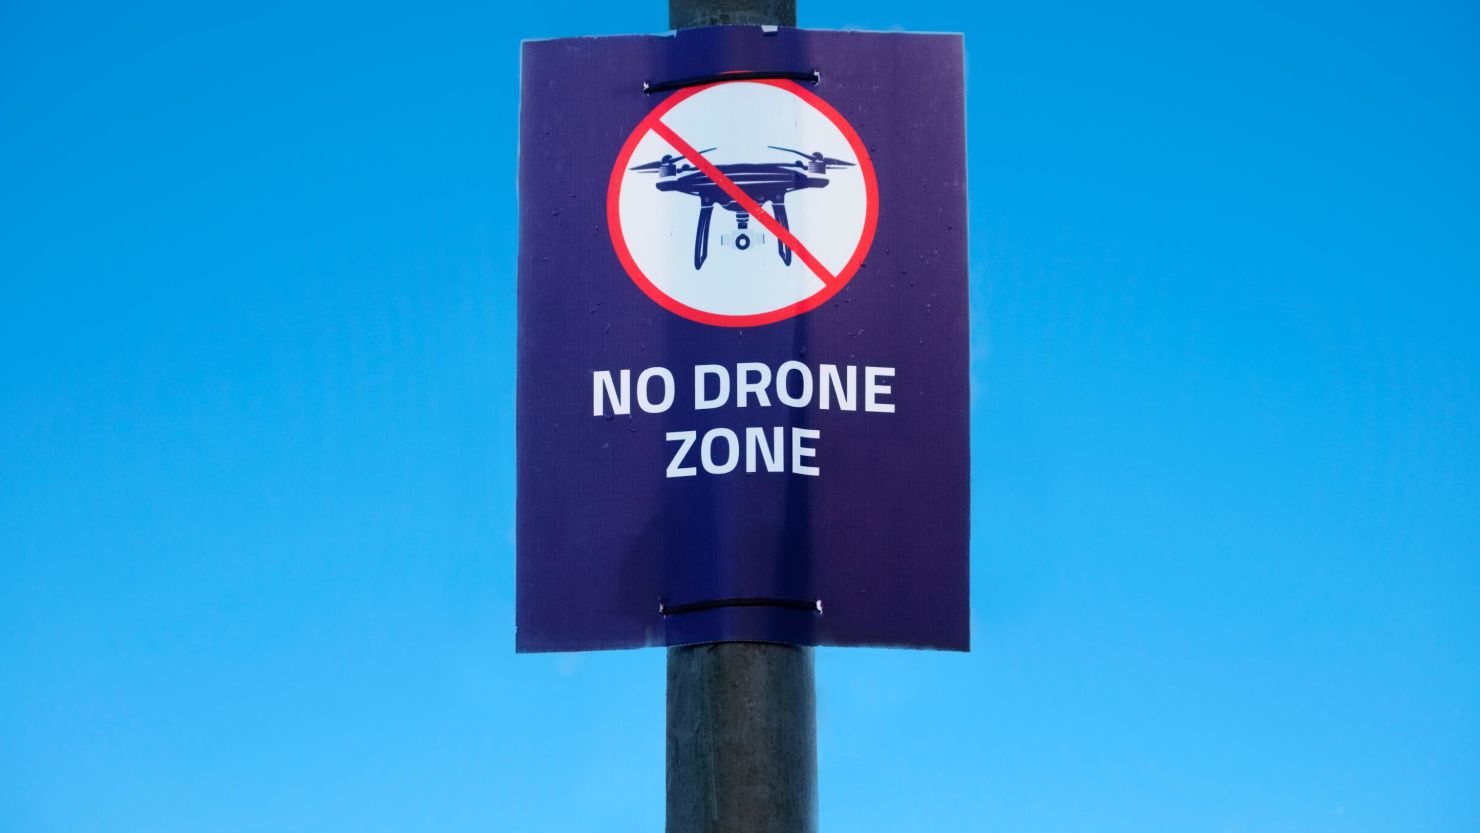 A "no drone zone" poster is seen at Gatwick Airport, which was brought to a halt for 36 hours in December following drone sightings.